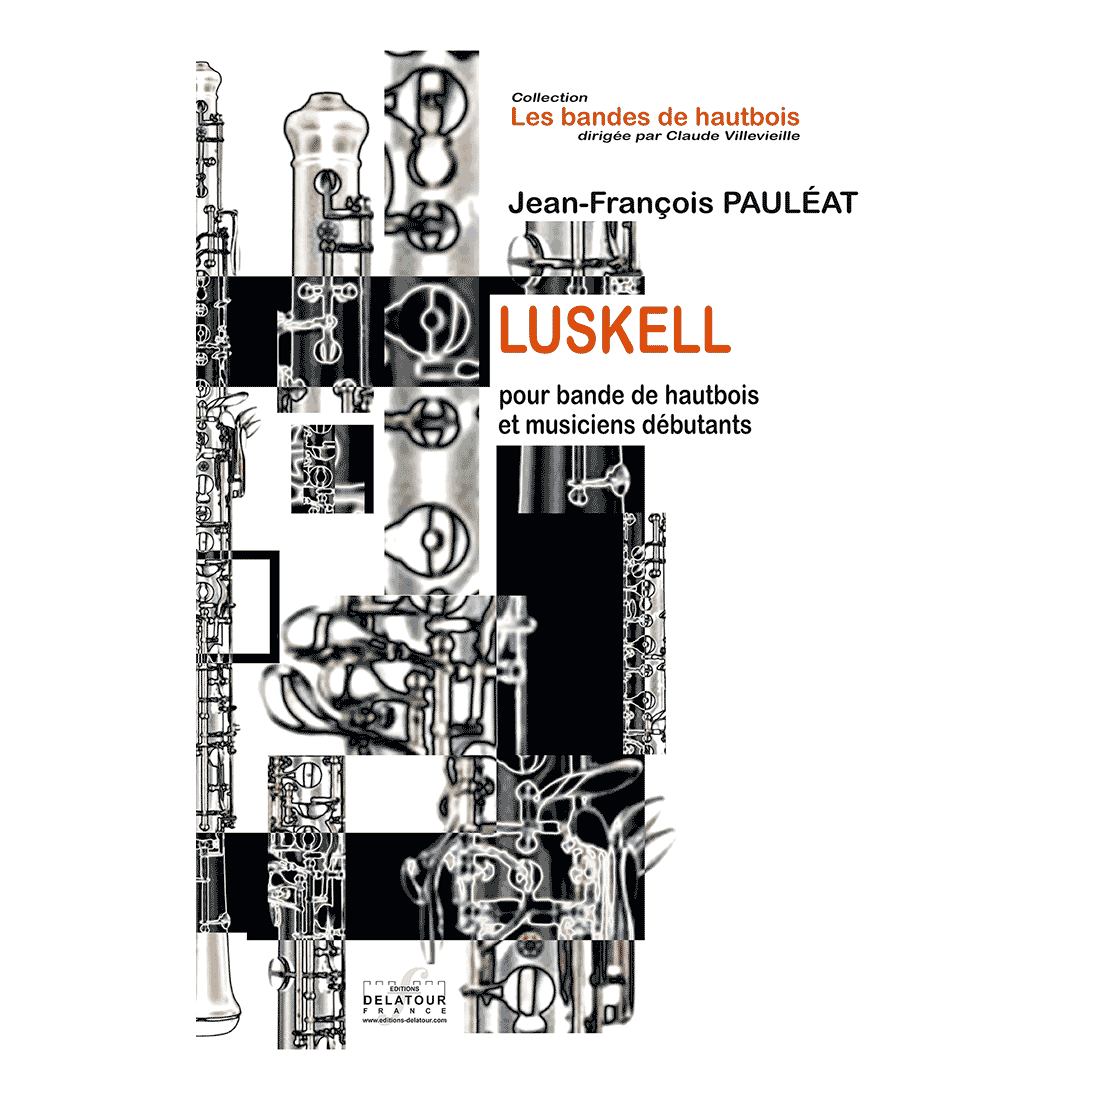 Luskell for oboe band and beginner musicians